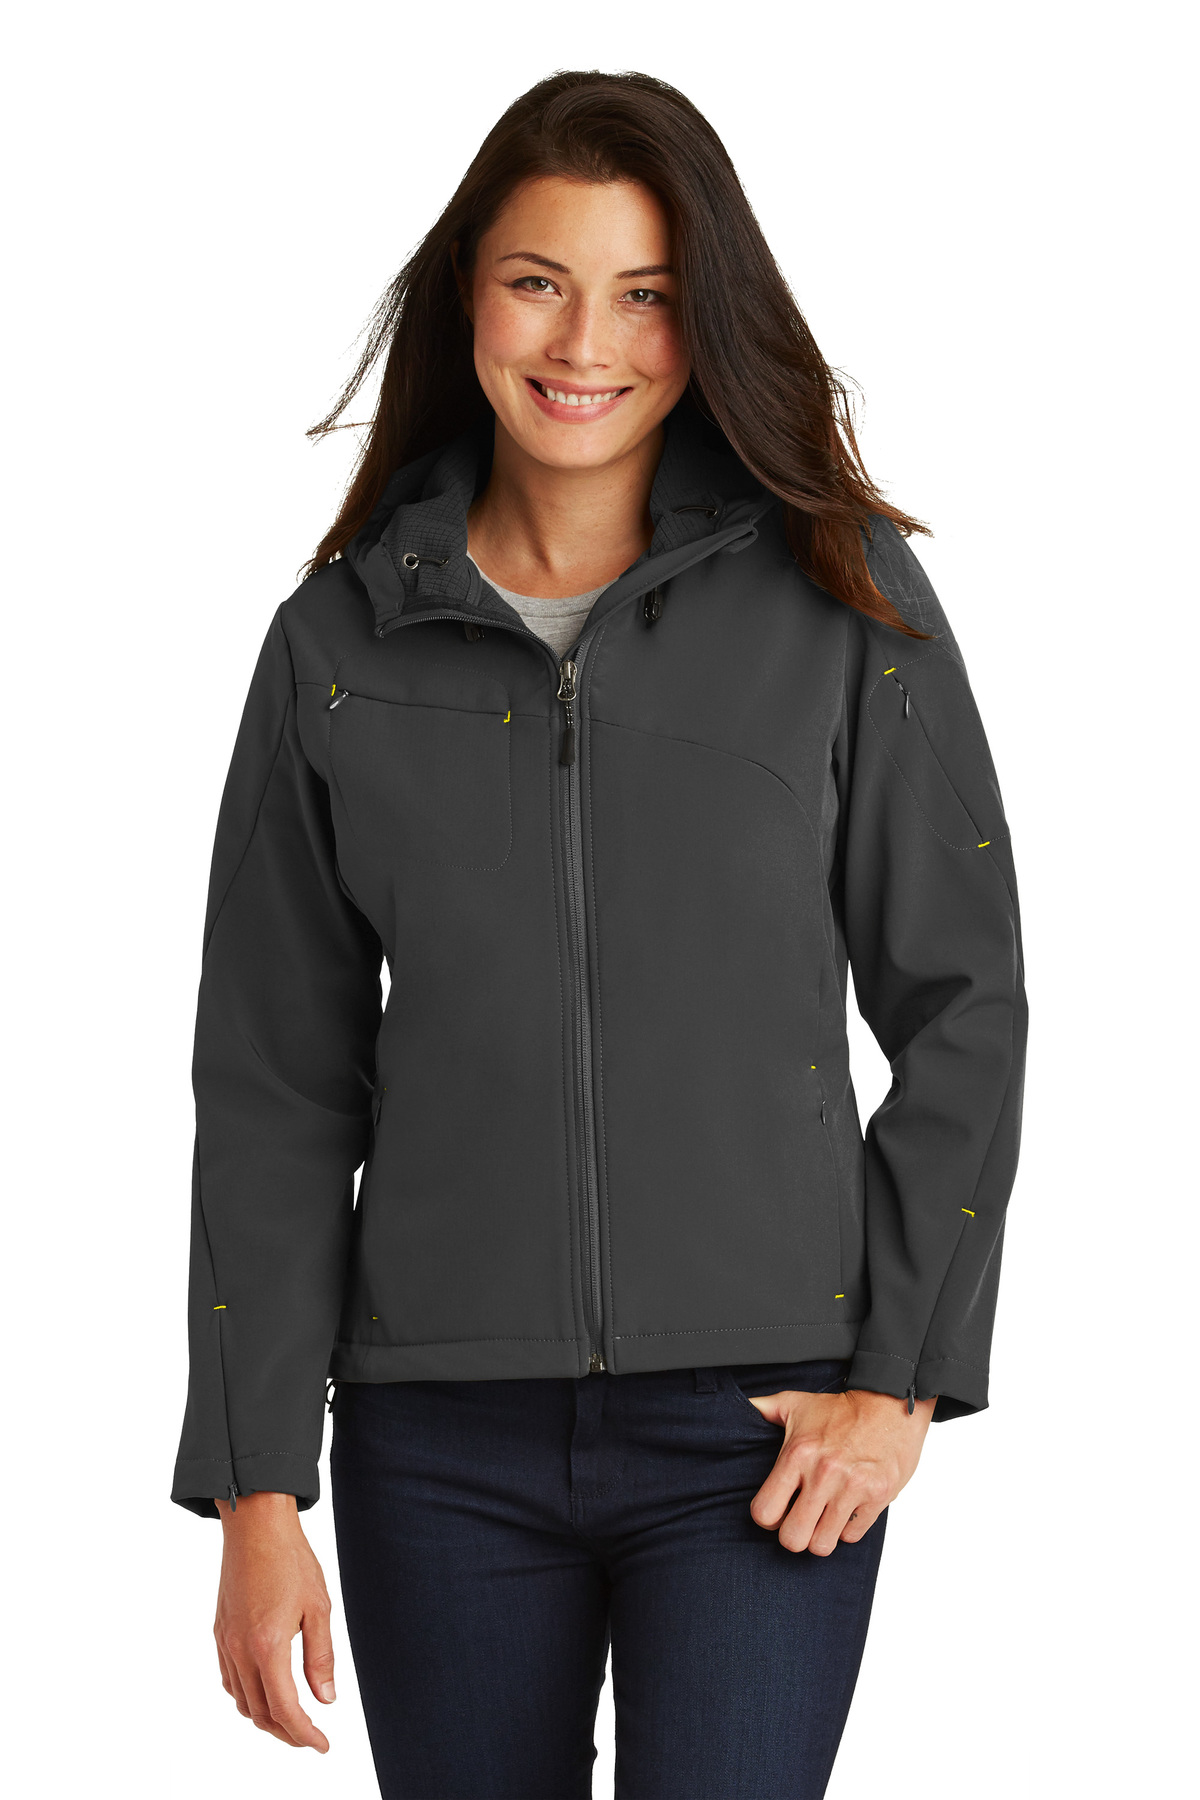 Port Authority Ladies Textured Hooded Soft Shell Jacket | Product ...